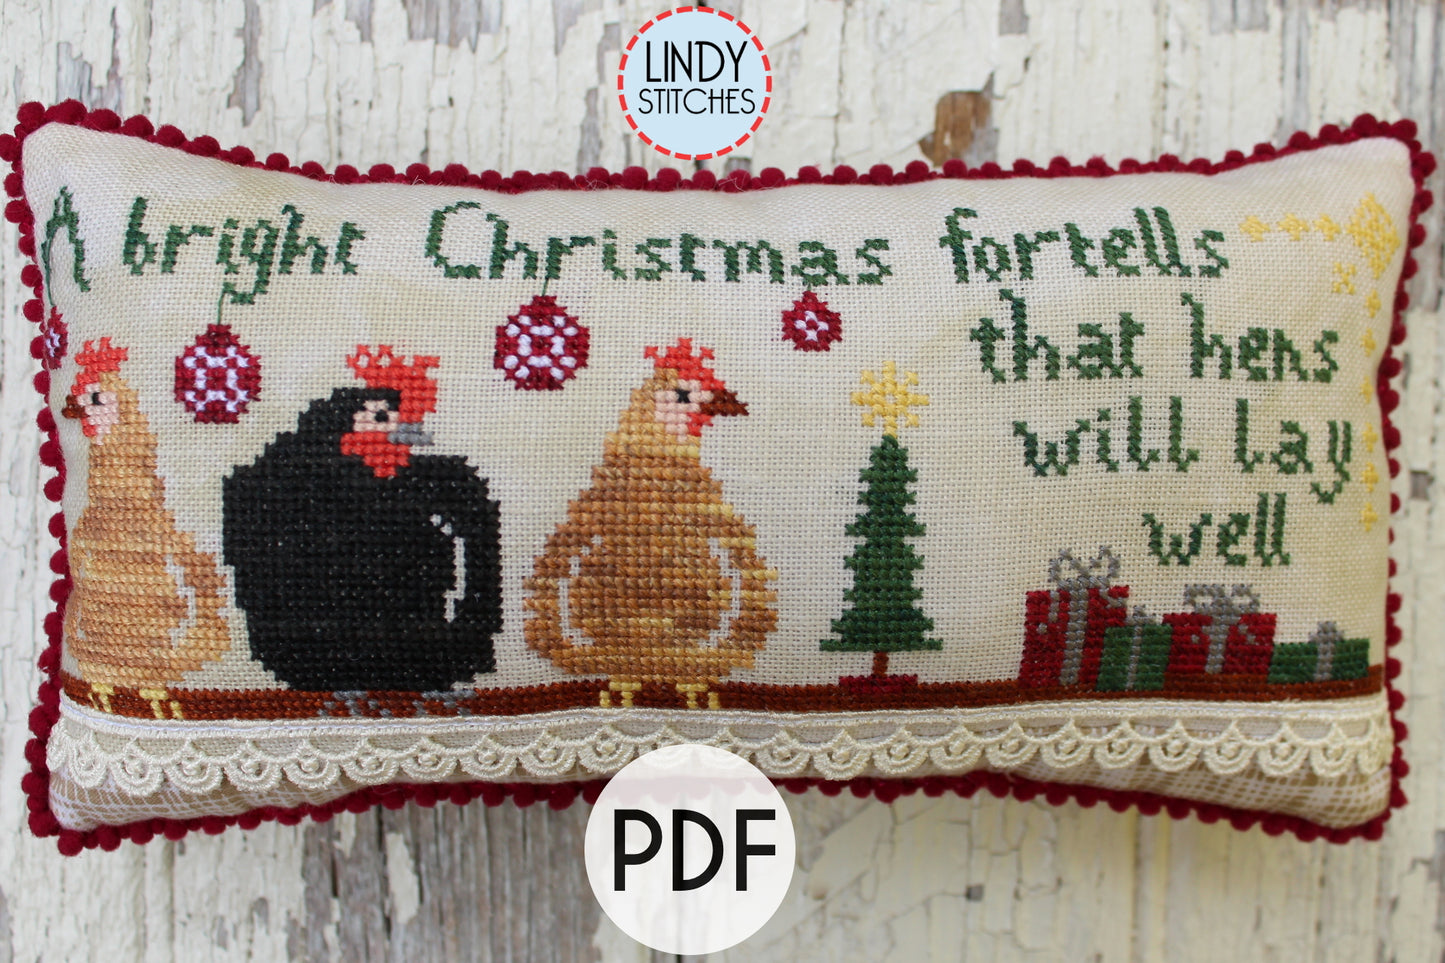 Weather Proverb Set of Four PDF Cross Stitch Patterns by Lindy Stitches